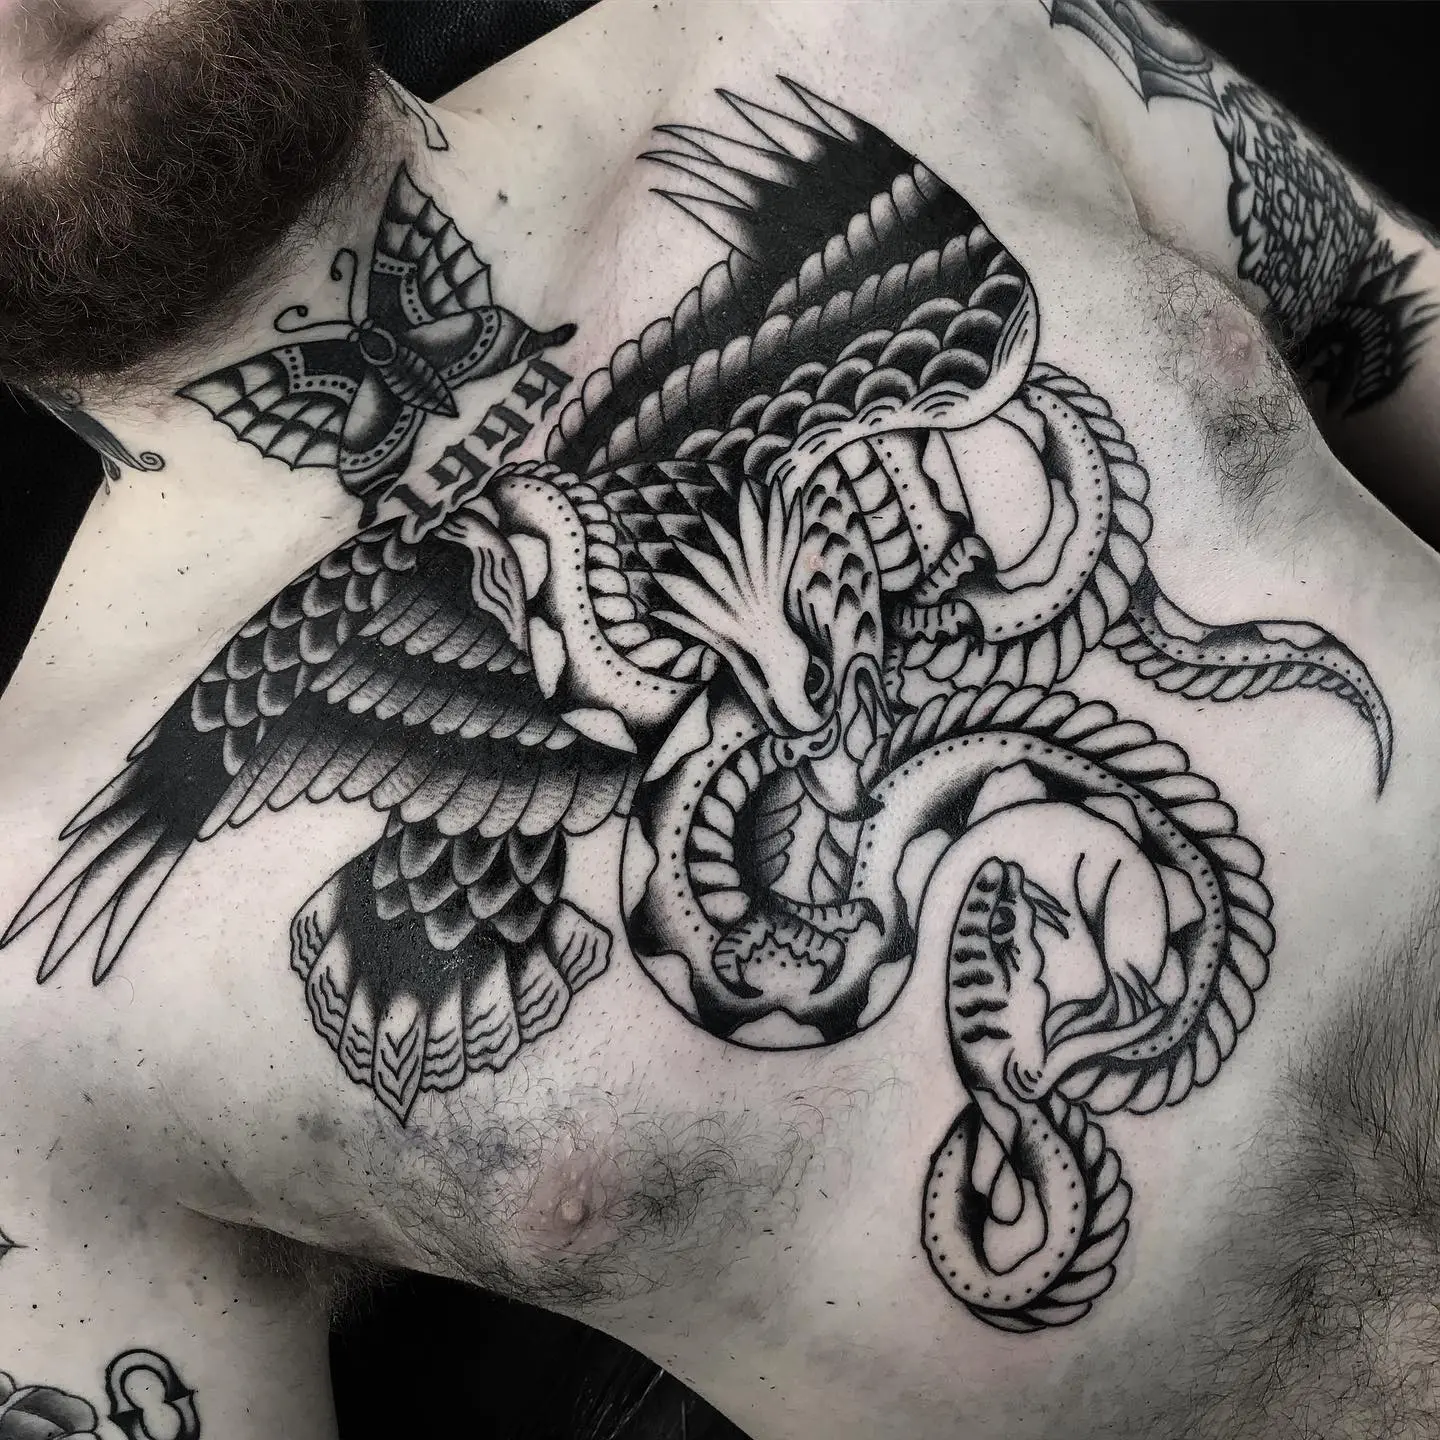 Machine Gun Kelly unveils jaw-dropping upper body tattoo that took 78 hours  to complete | Evening Standard